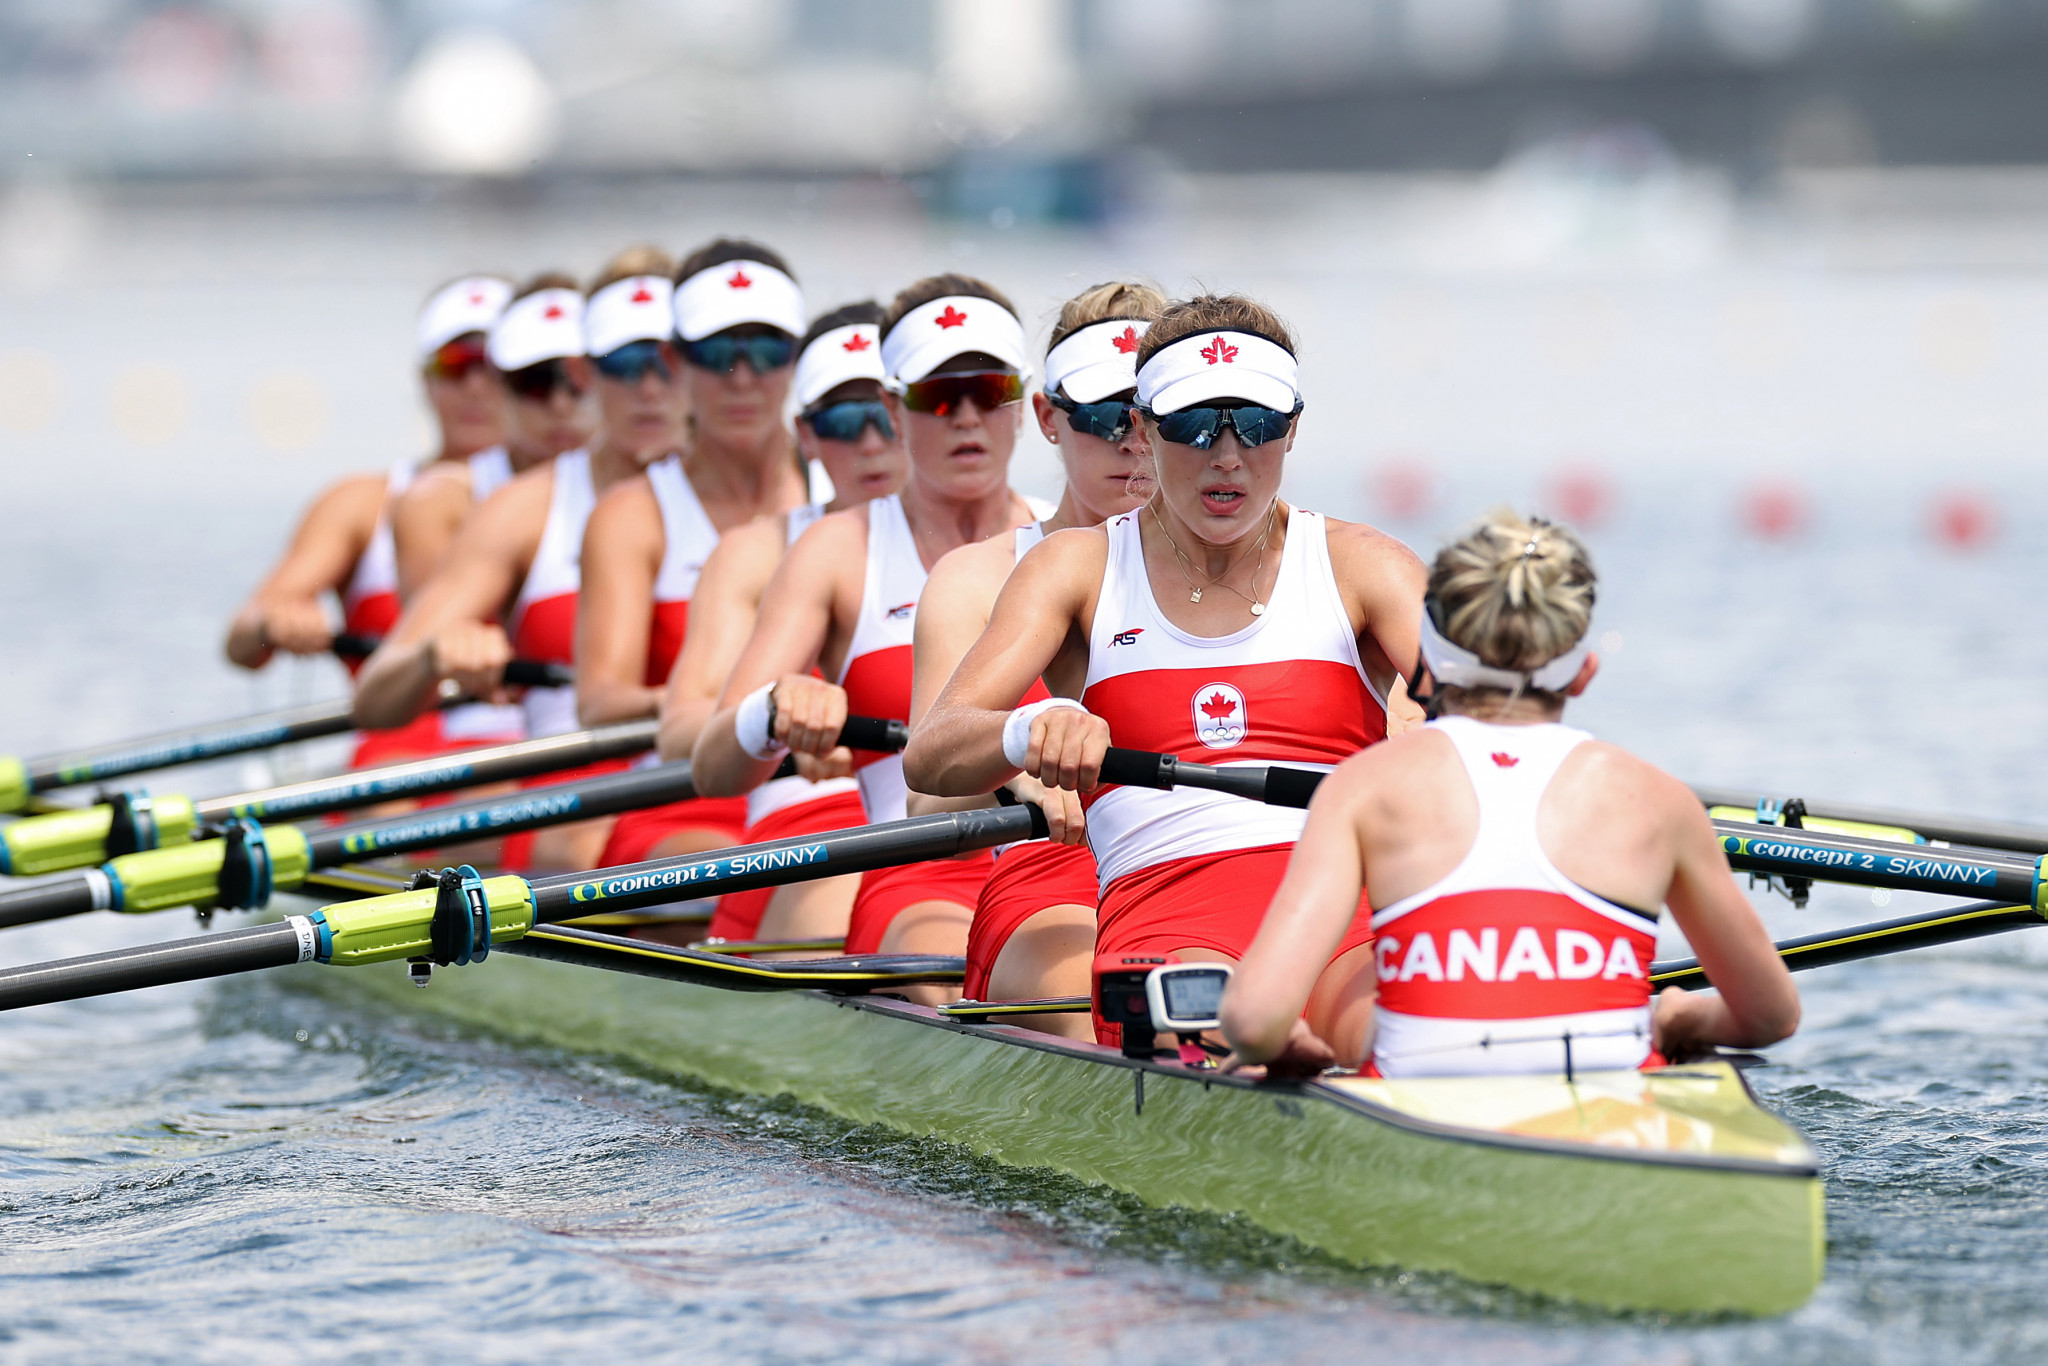 Rowing Canada Aviron's high-performance programme was found to contain several culture failings ©Getty Images